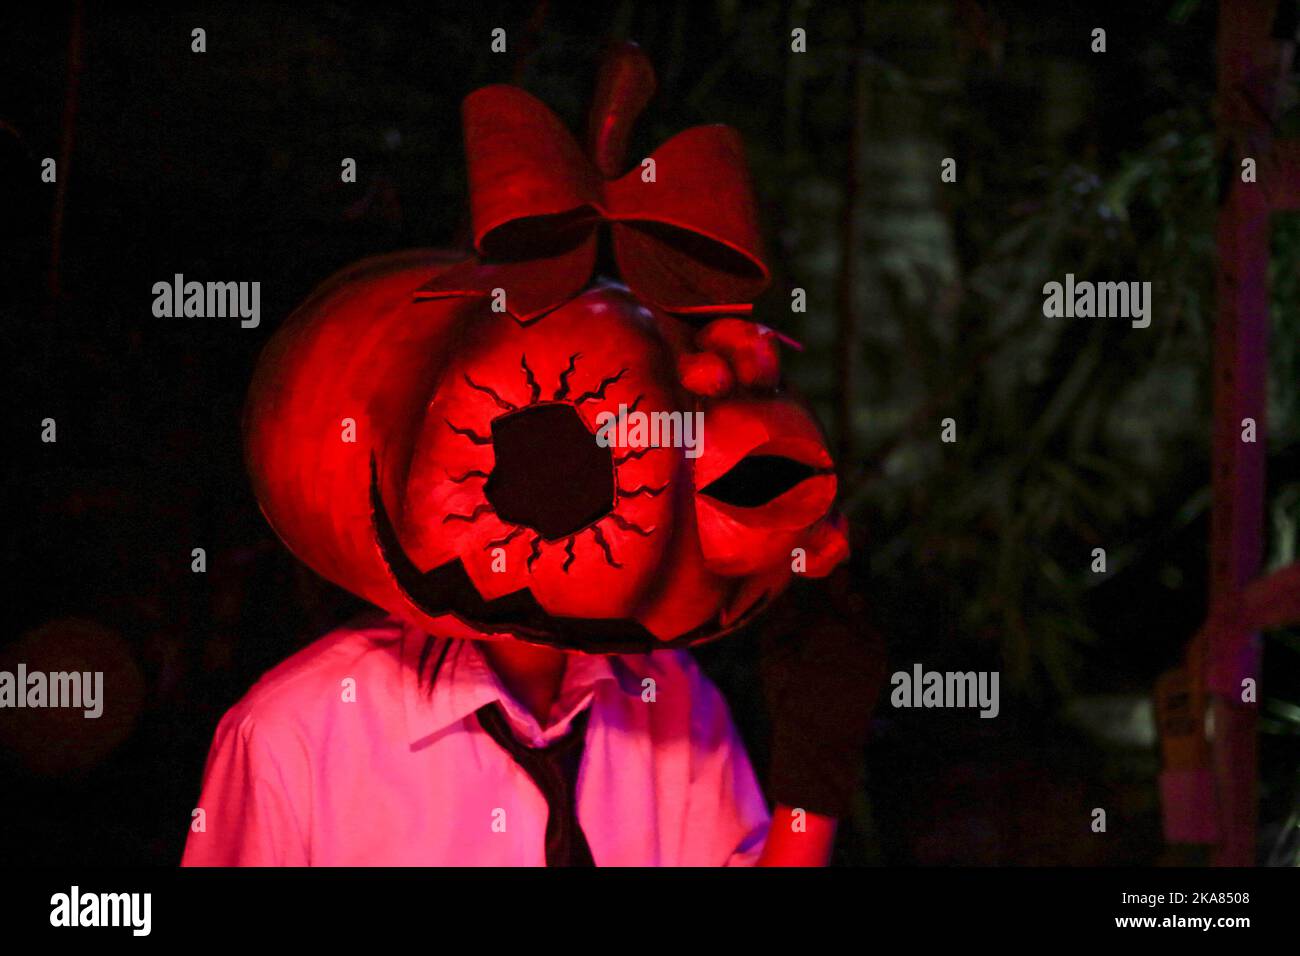 On October.31,2022 in Kathmandu, Nepal. Nepalese youth wears assorted masks while taking part in 'Halloween' party at a resturant on the eve of the Western Christian feast of All Hallows' Day. (Photo by Abhishek Maharjan/Sipa USA) (Photo by Abhishek Maharjan/Sipa USA) Stock Photo